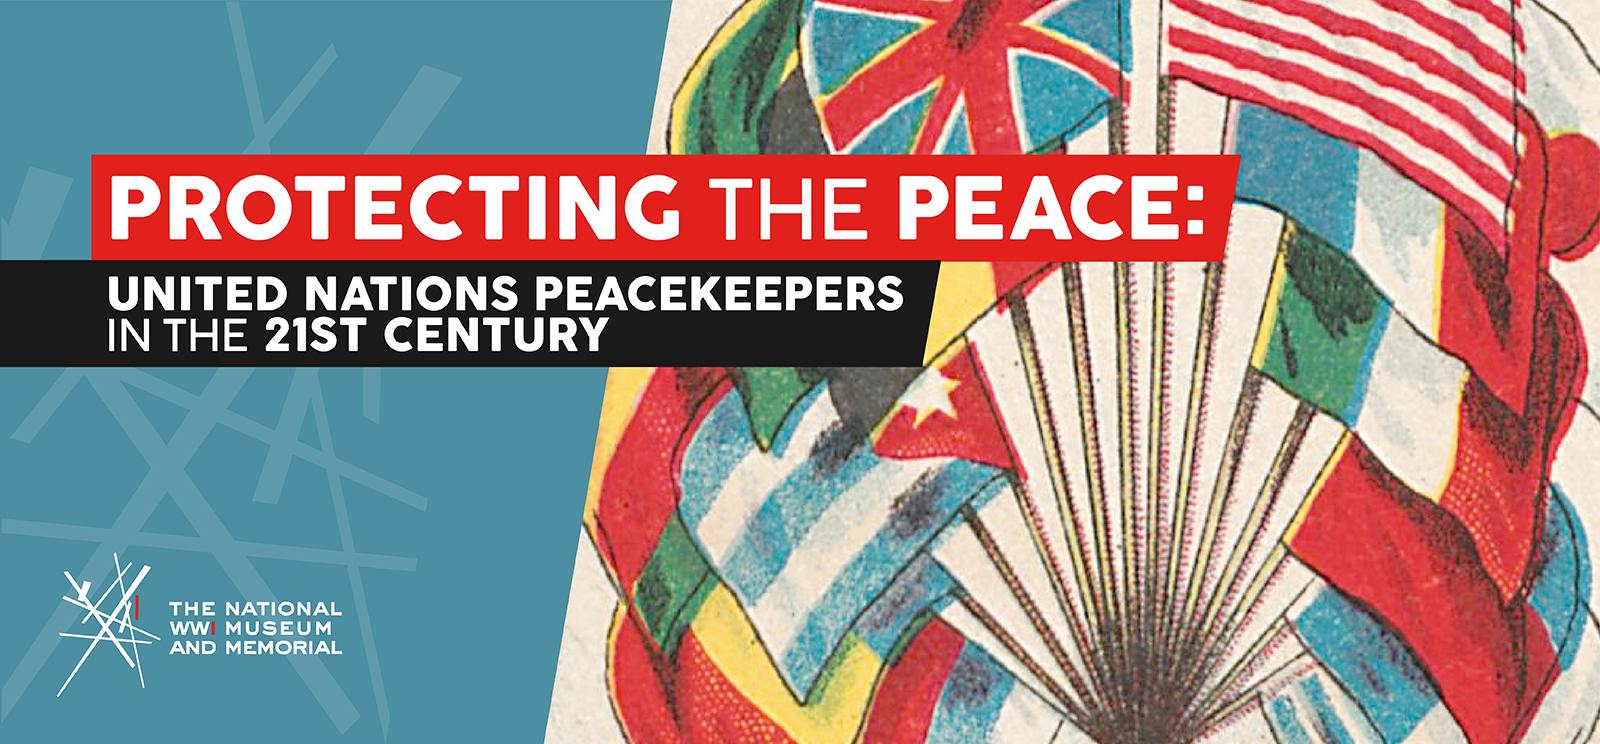 Image: illustration of many nations' flags. Text: Protecting the Peace / United Nations Peacekeepers in the 21st Century